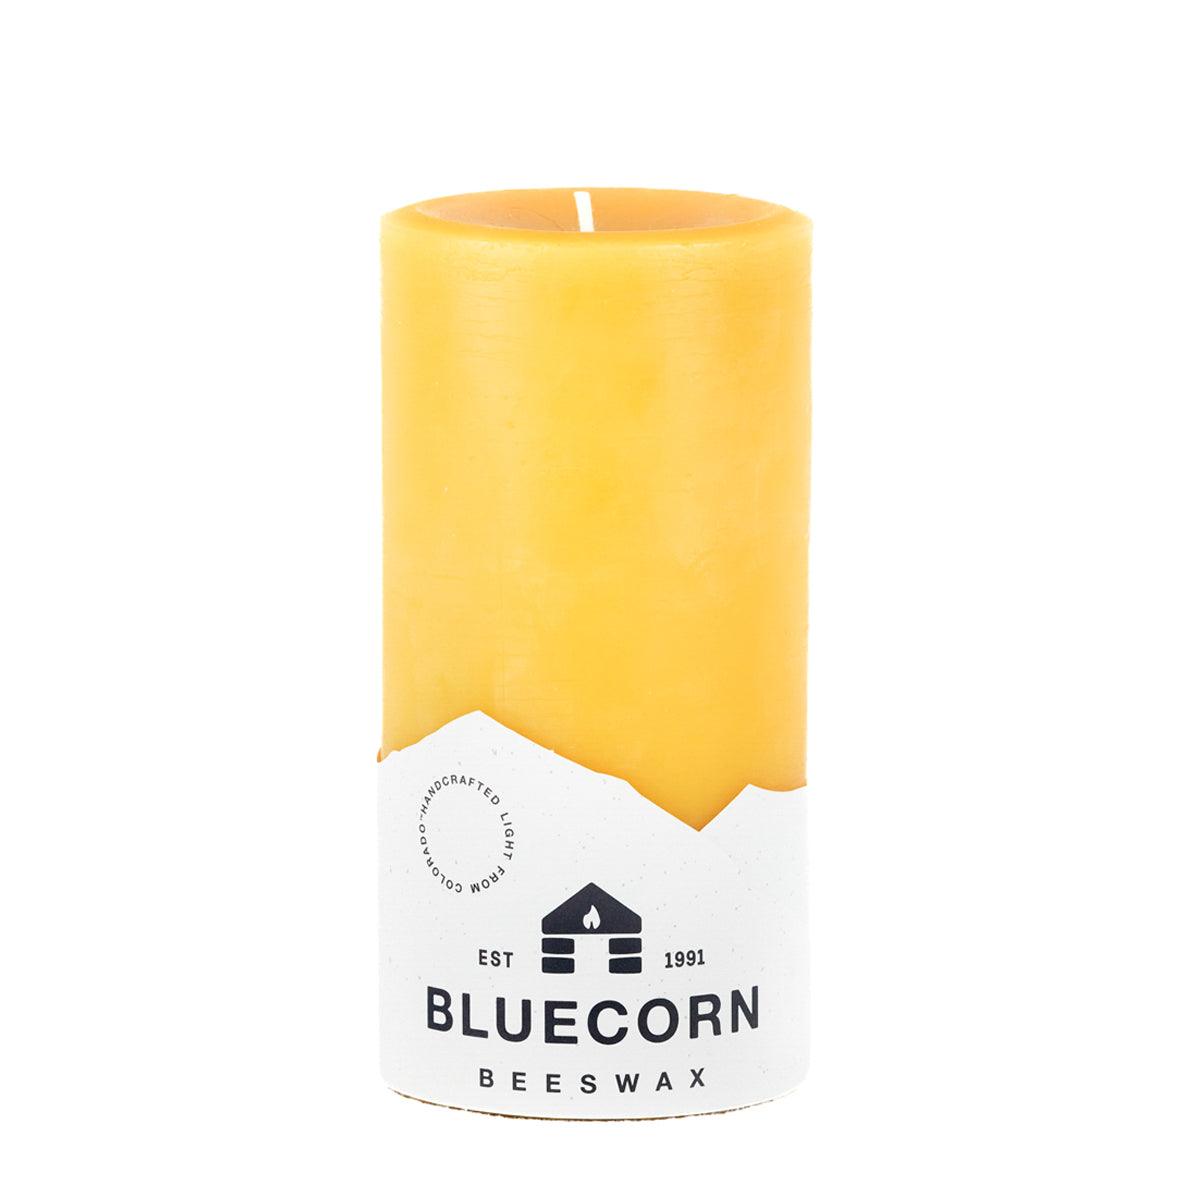 Bluecorn Beeswax 100% Pure Beeswax 3" x 6" Raw Pillar Candle. Burn Time: 90 hours. Made with 100% Pure Beeswax, is golden in color, with a light honey scent. Made with 100% pure cotton wick, no lead and paraffin free. Clean burning and non-toxic. Features Bluecorn Beeswax label printed on 100% recycled paper.